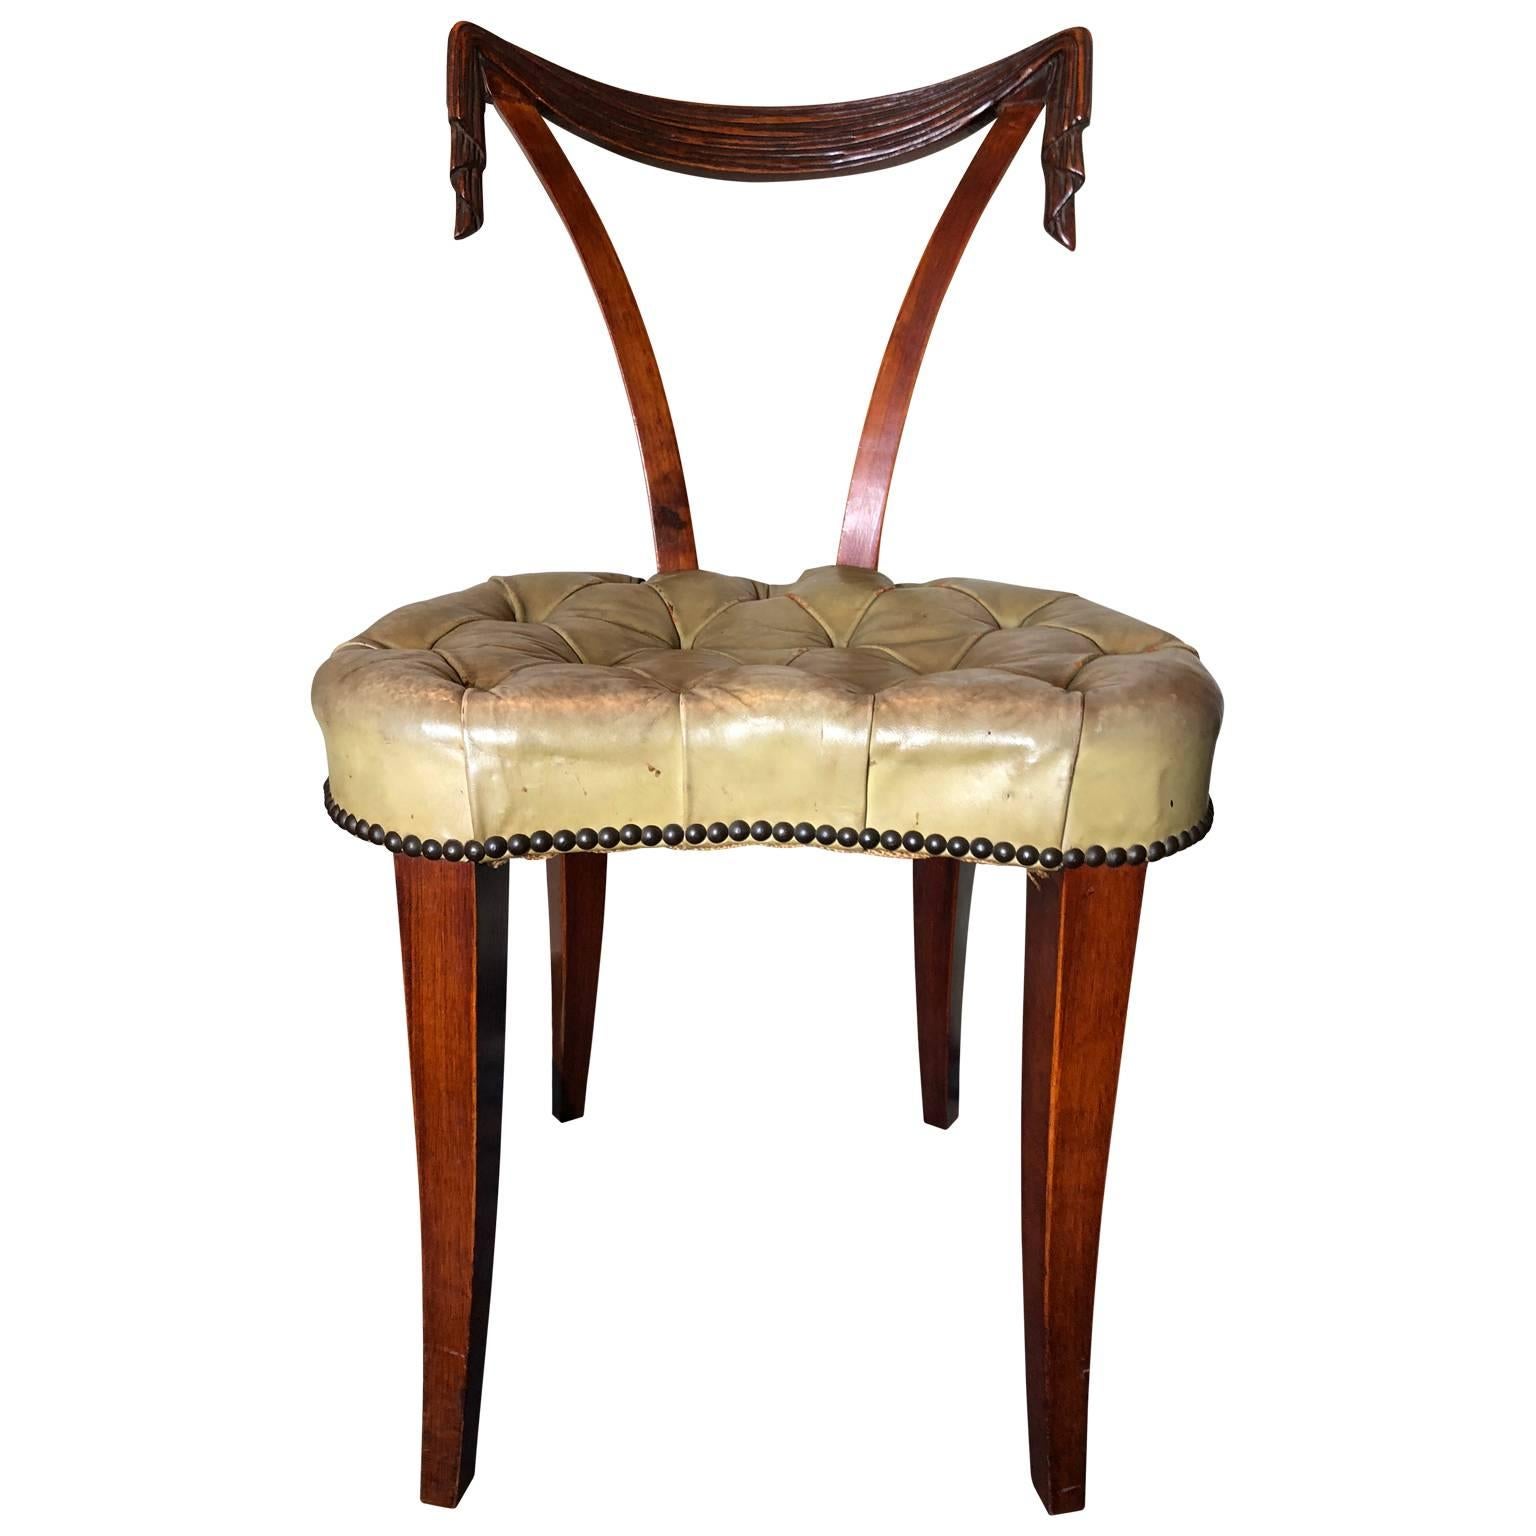 1940s Hollywood Regency draped chair that can be used as a vanity or desk chair. The upholstery is the original leather.
$125 flat rate front door delivery includes Washington DC metro, Baltimore and Philadelphia

 